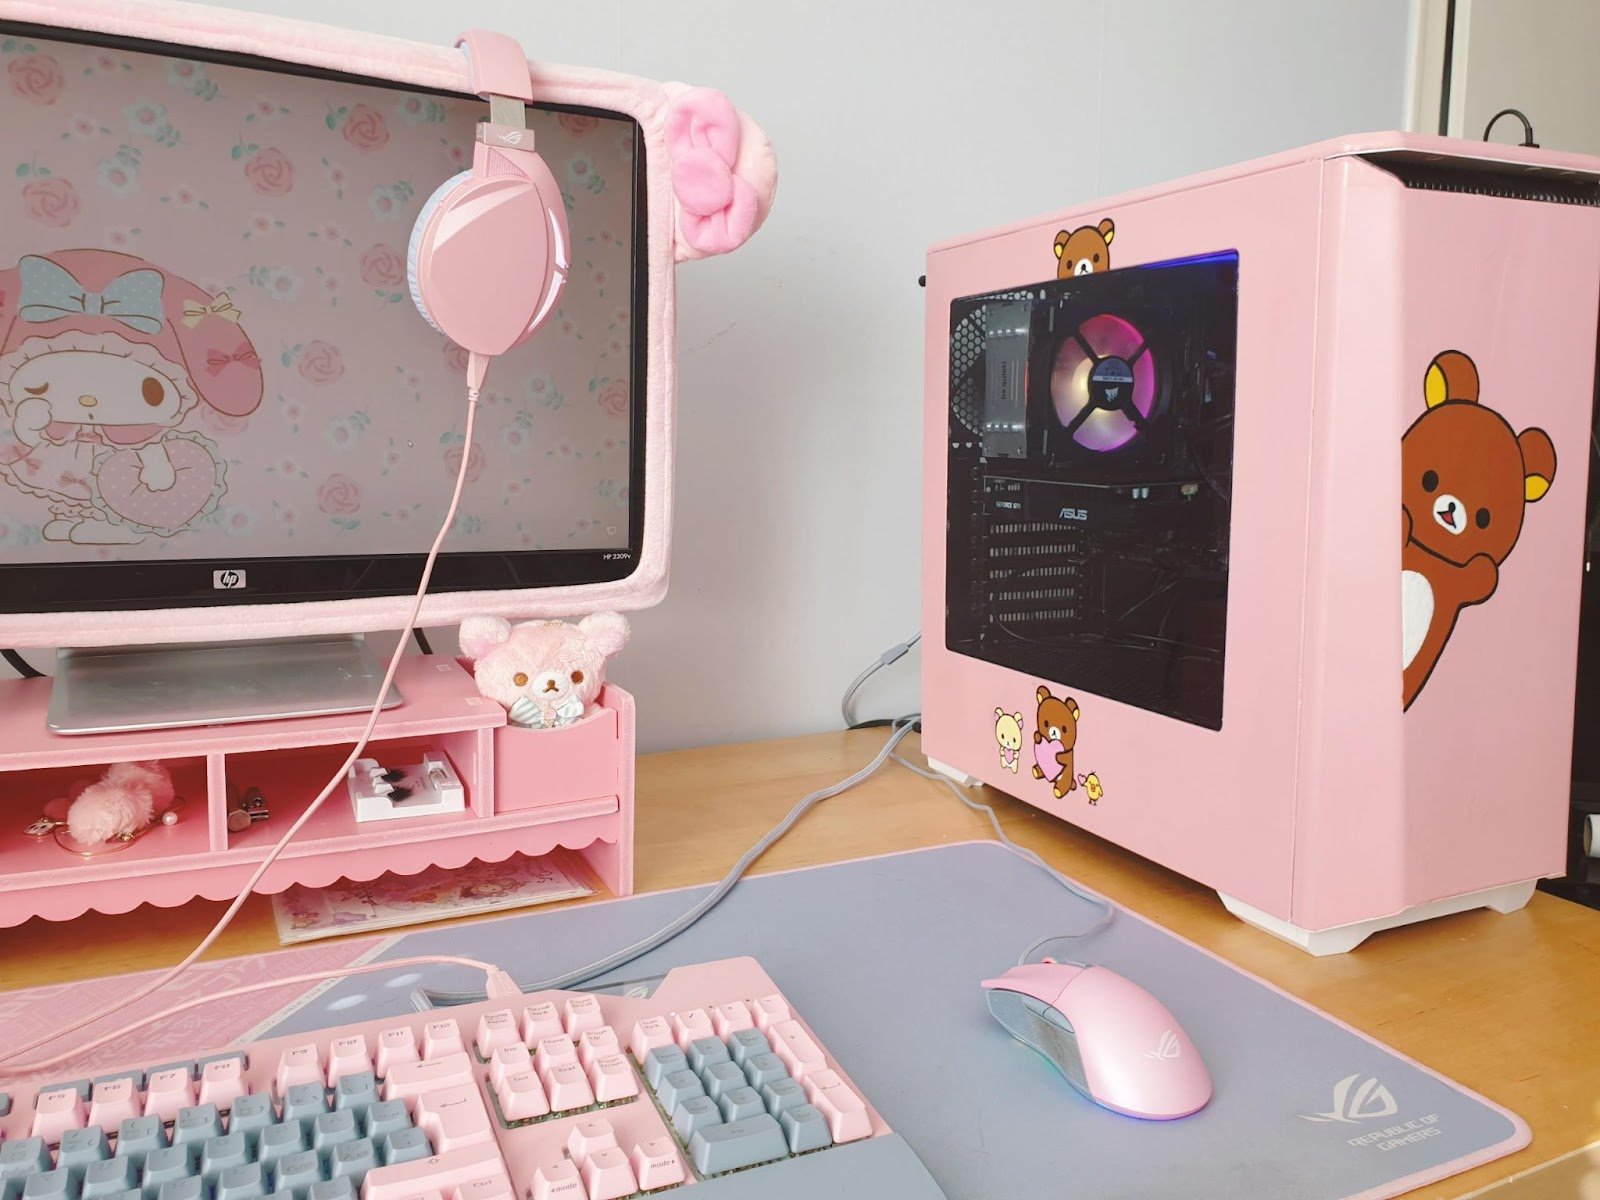 Gaming accessories that can make your setup a lot cuter